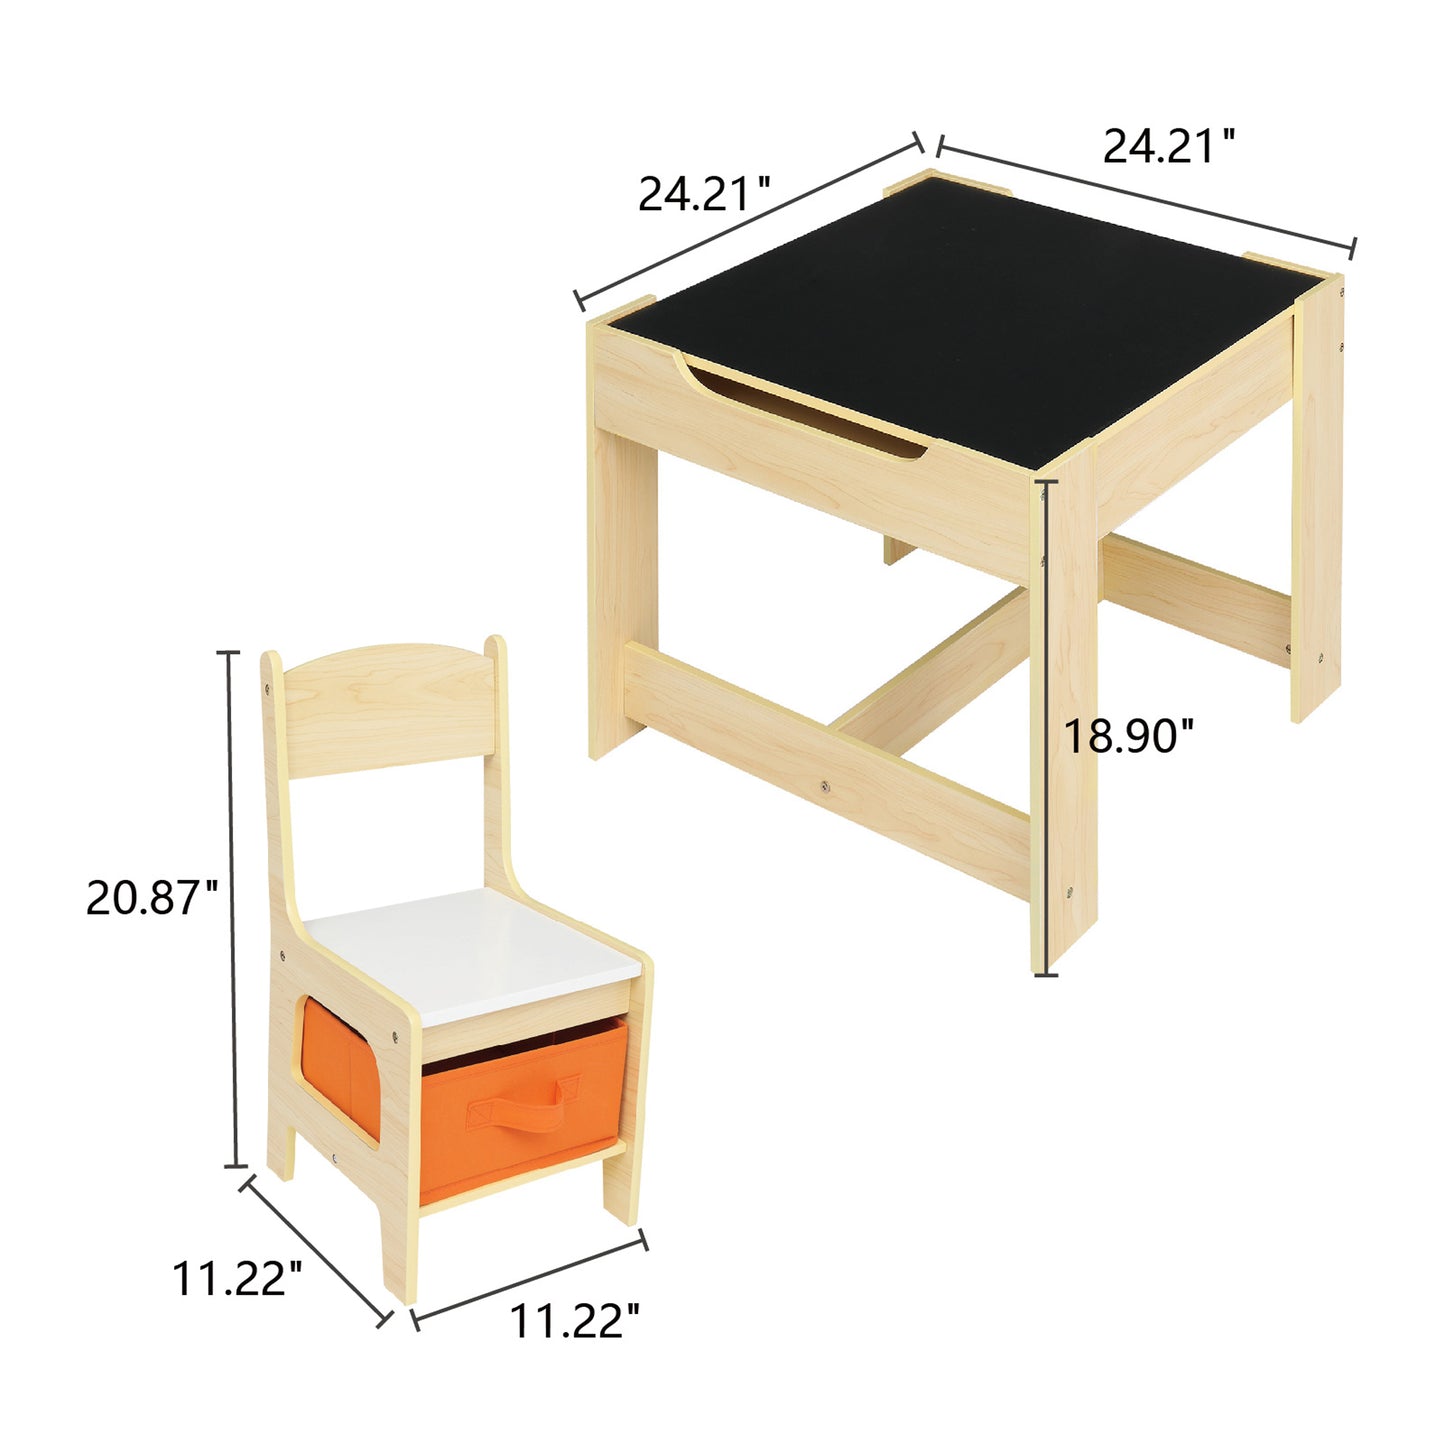 Kids Table and Chair Set with 2 Storage Bags, Toddler 3 in 1 Study Activity Table & 2 Chairs Set w/ Removable Desktop, Children Play Table Set for Art, Crafts, Reading, Writing, Drawing, Wooden, C17